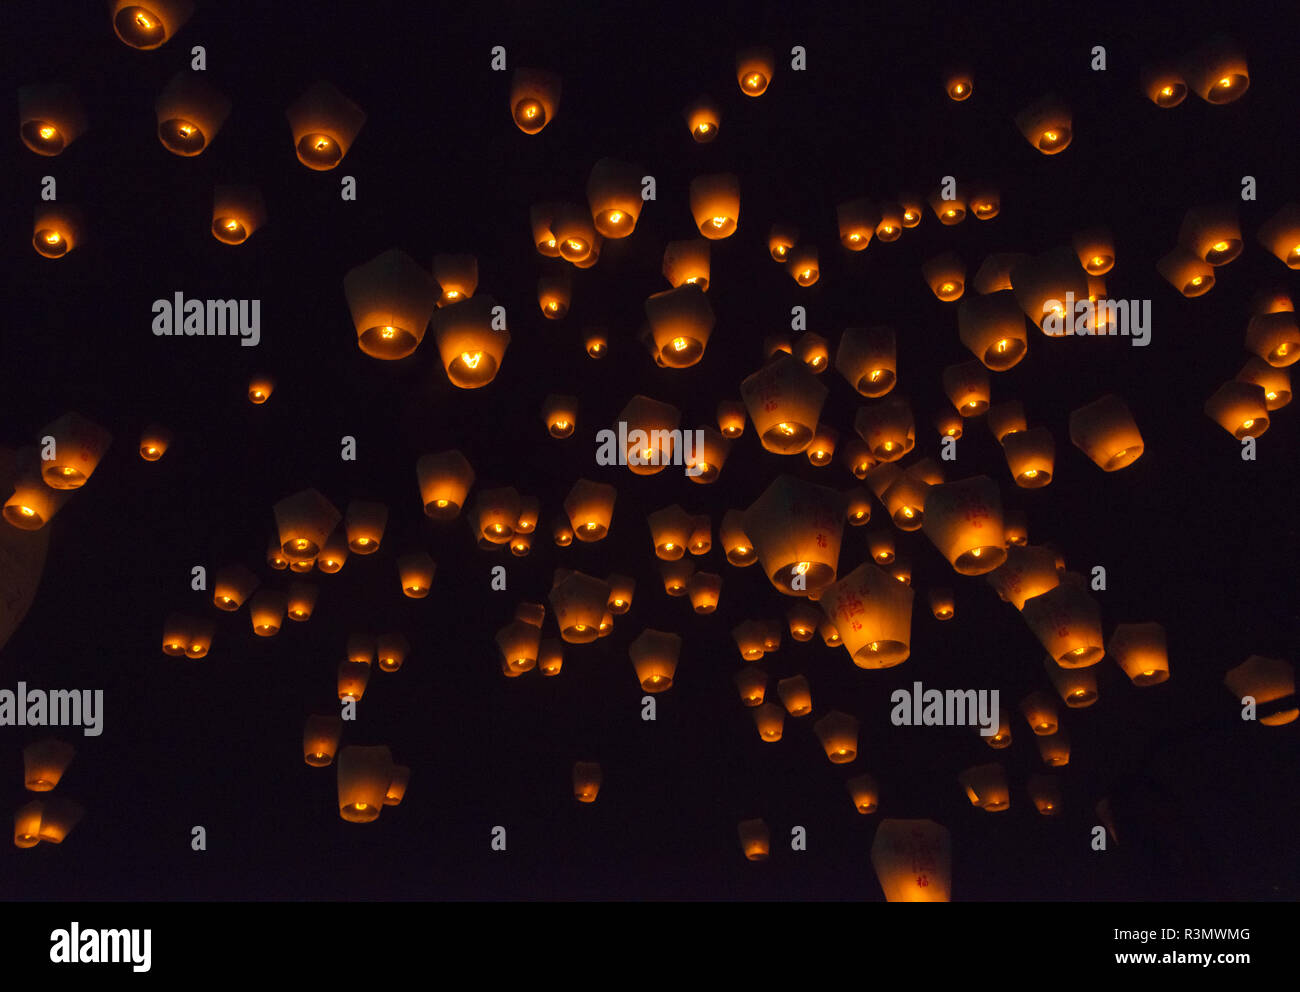 Night view of Sky Lanterns in the air during Chinese Lantern Festival, Shifen, Taiwan Stock Photo